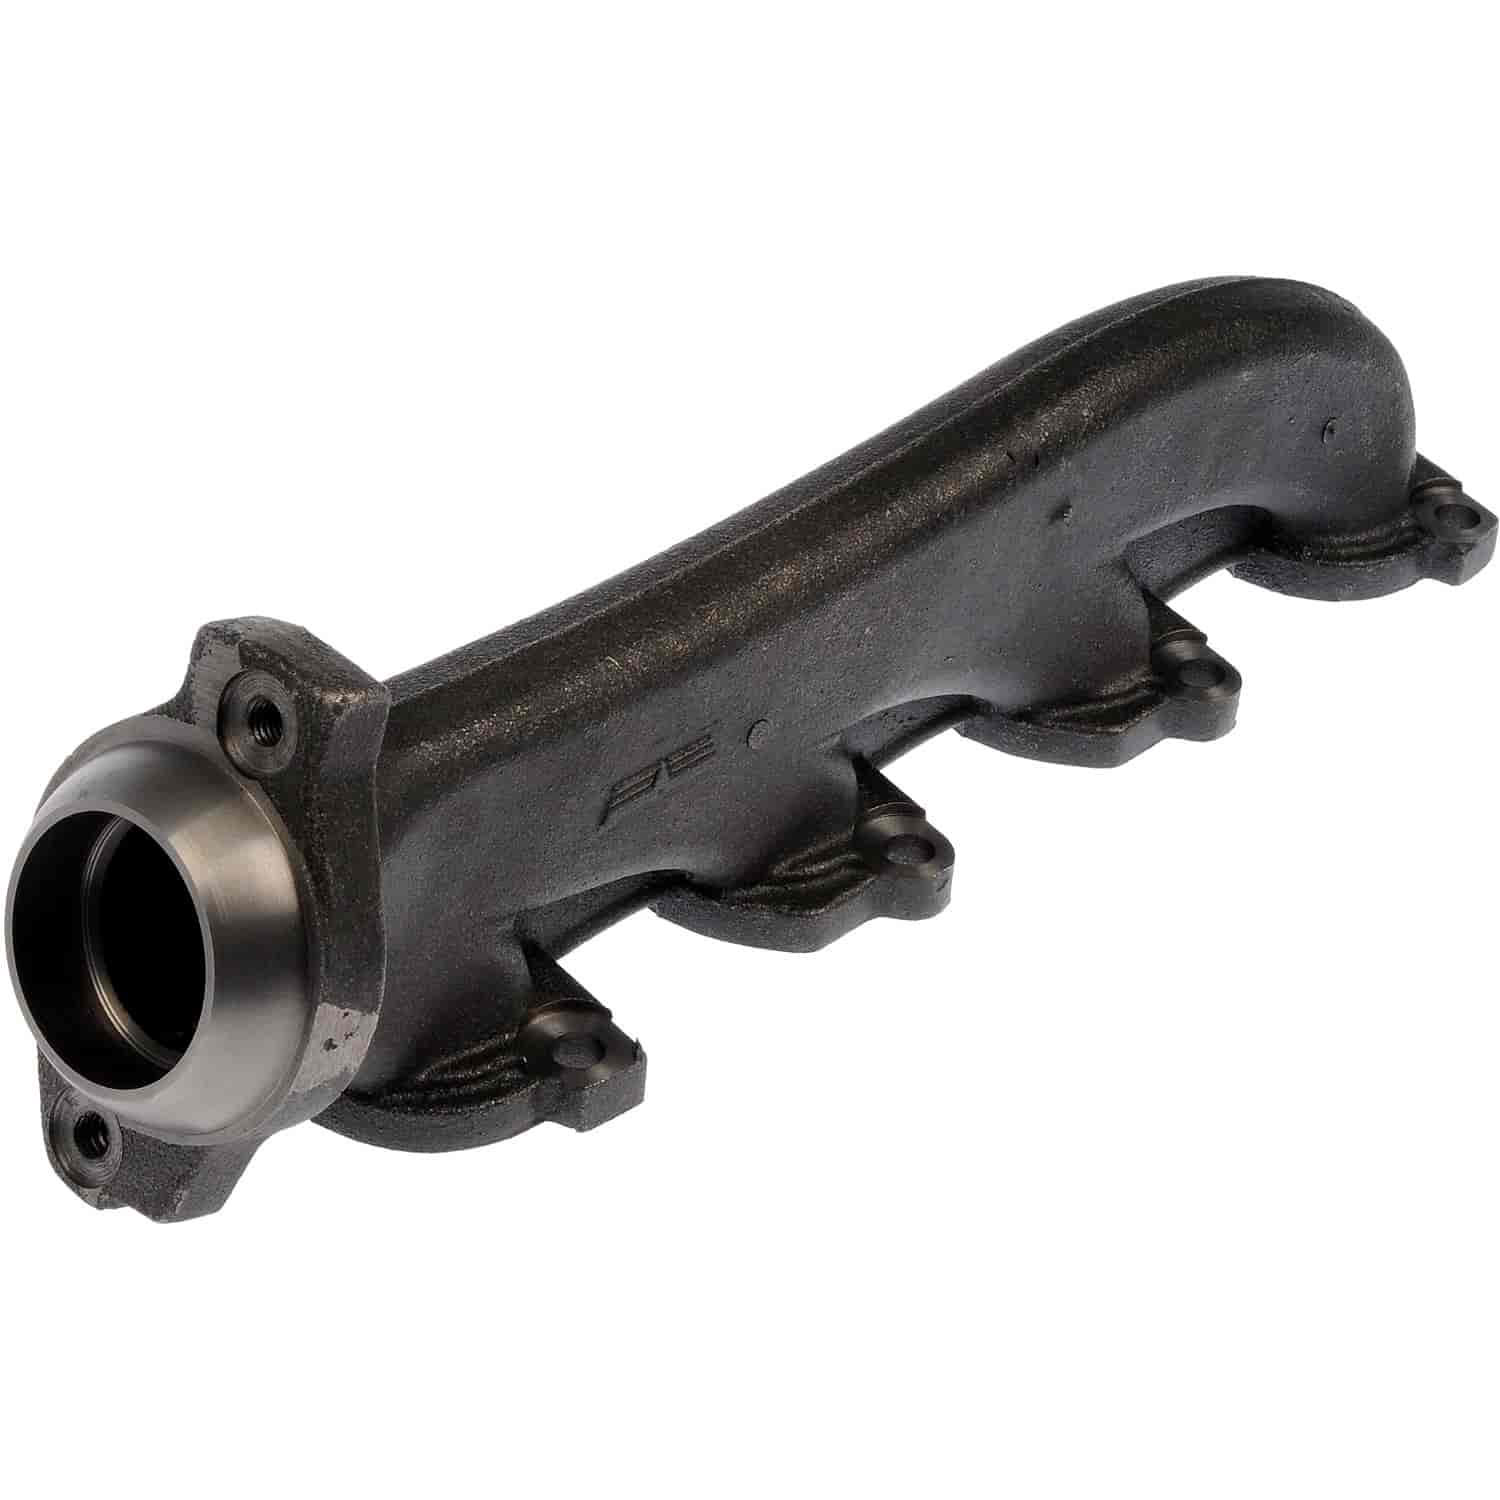 674-903 Cast-Iron Exhaust Manifold for 2003-2011, Ford Crown Victoria, Mercury Grand Marquis, Lincoln Town Car [Right/Pass.]